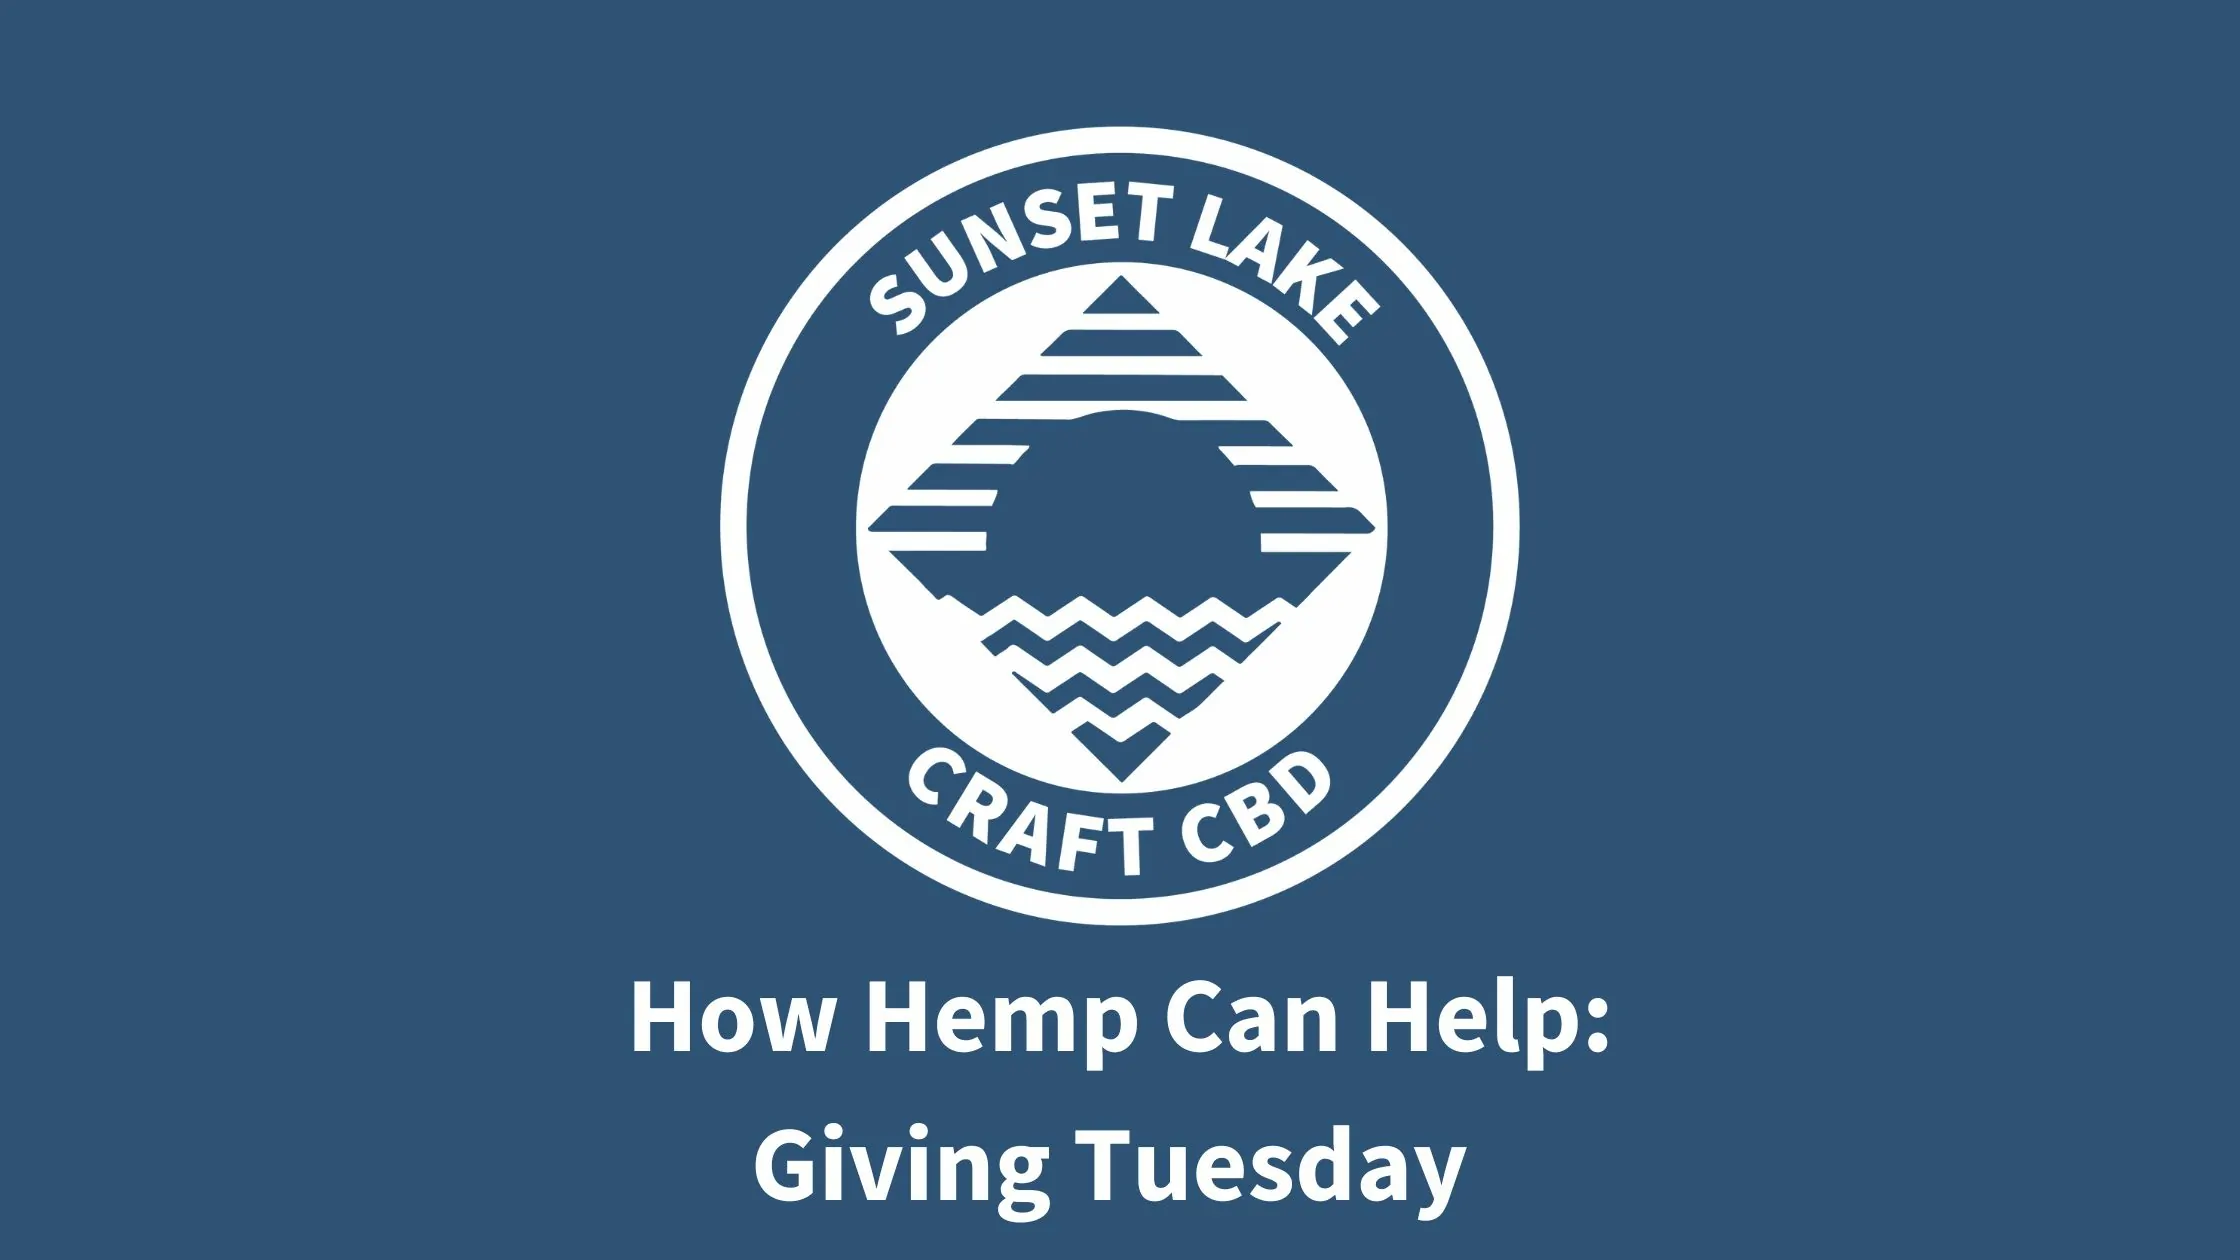 Sunset Lake Logo on Blue. Text reads "How Hemp Can Help: Giving Tuesday"